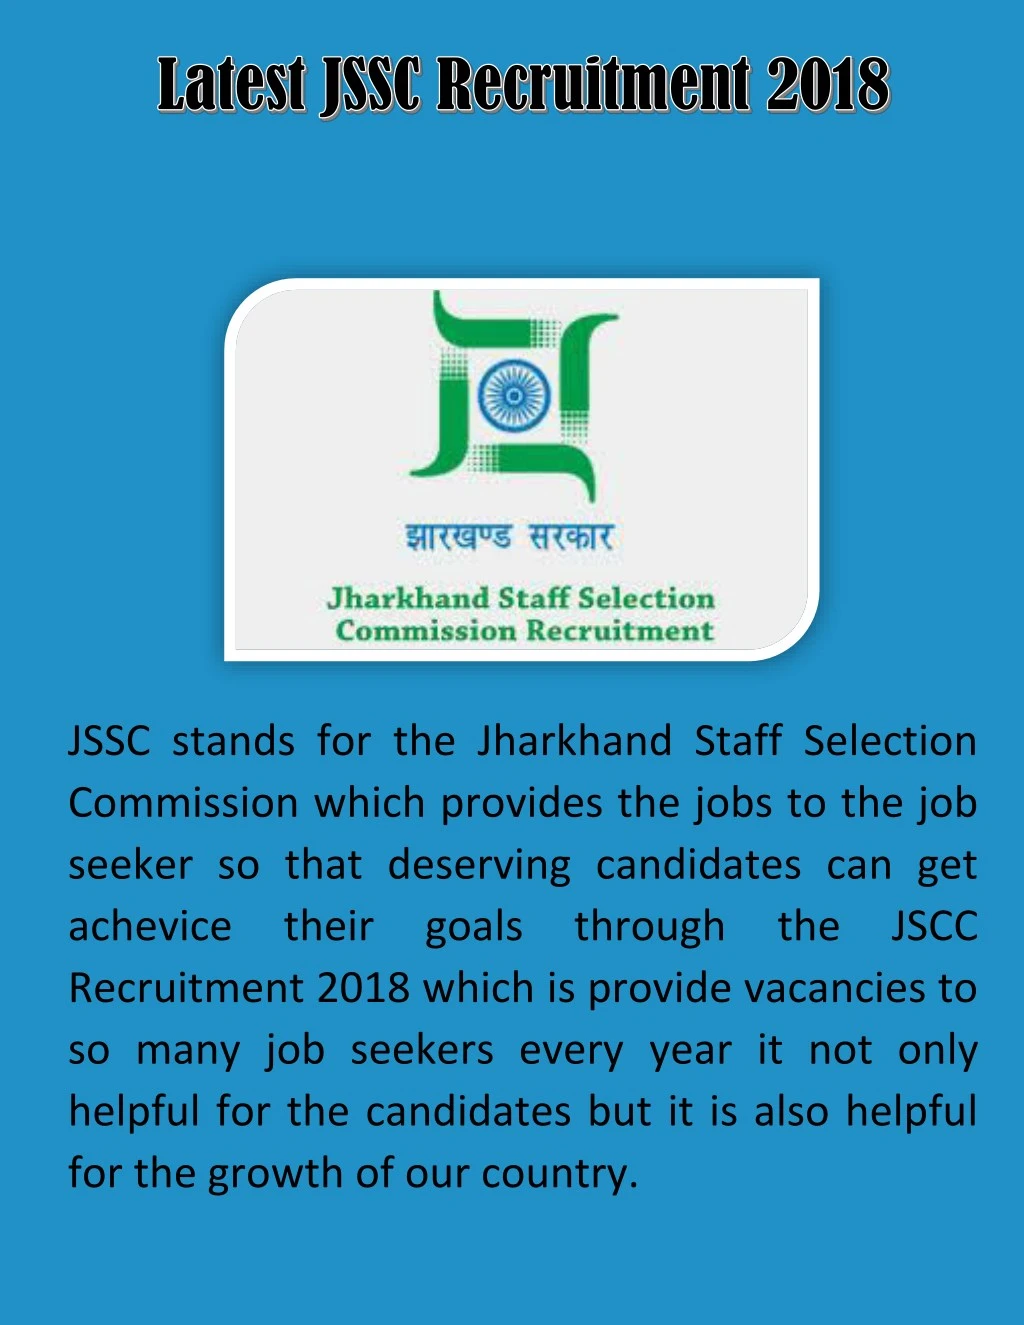 jssc stands for the jharkhand staff selection